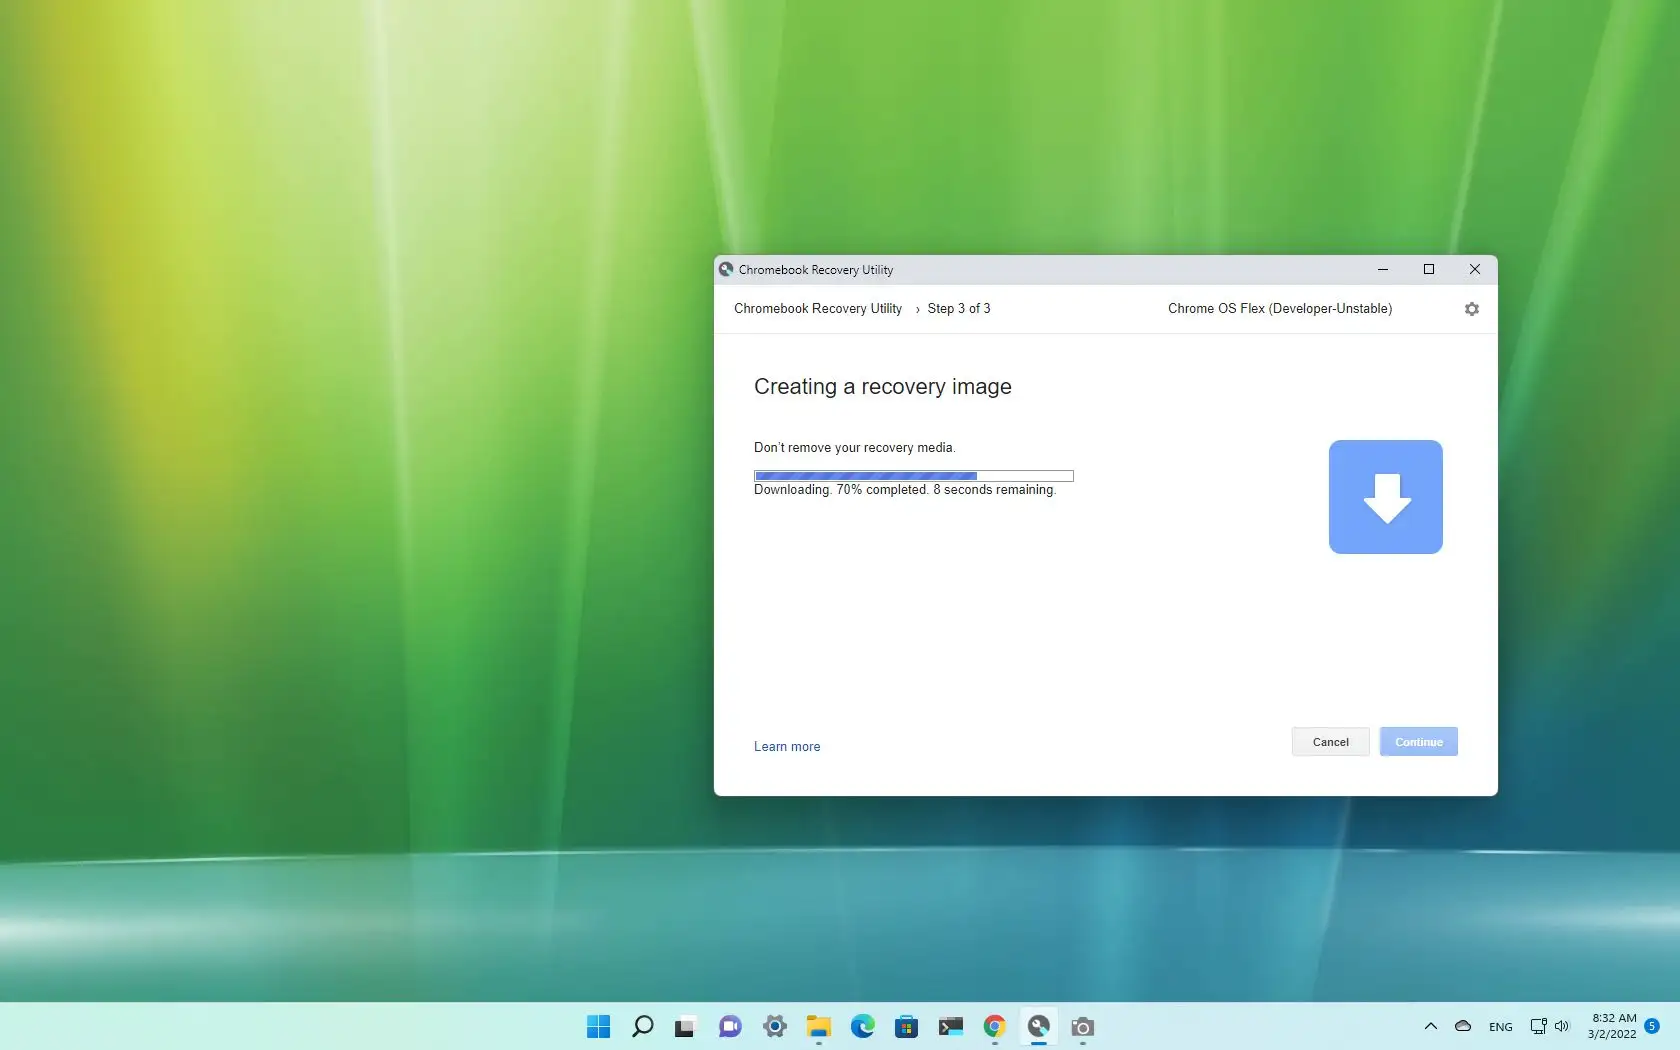 How Chrome OS Flex can turn your obsolete MacBook into an iCloud laptop